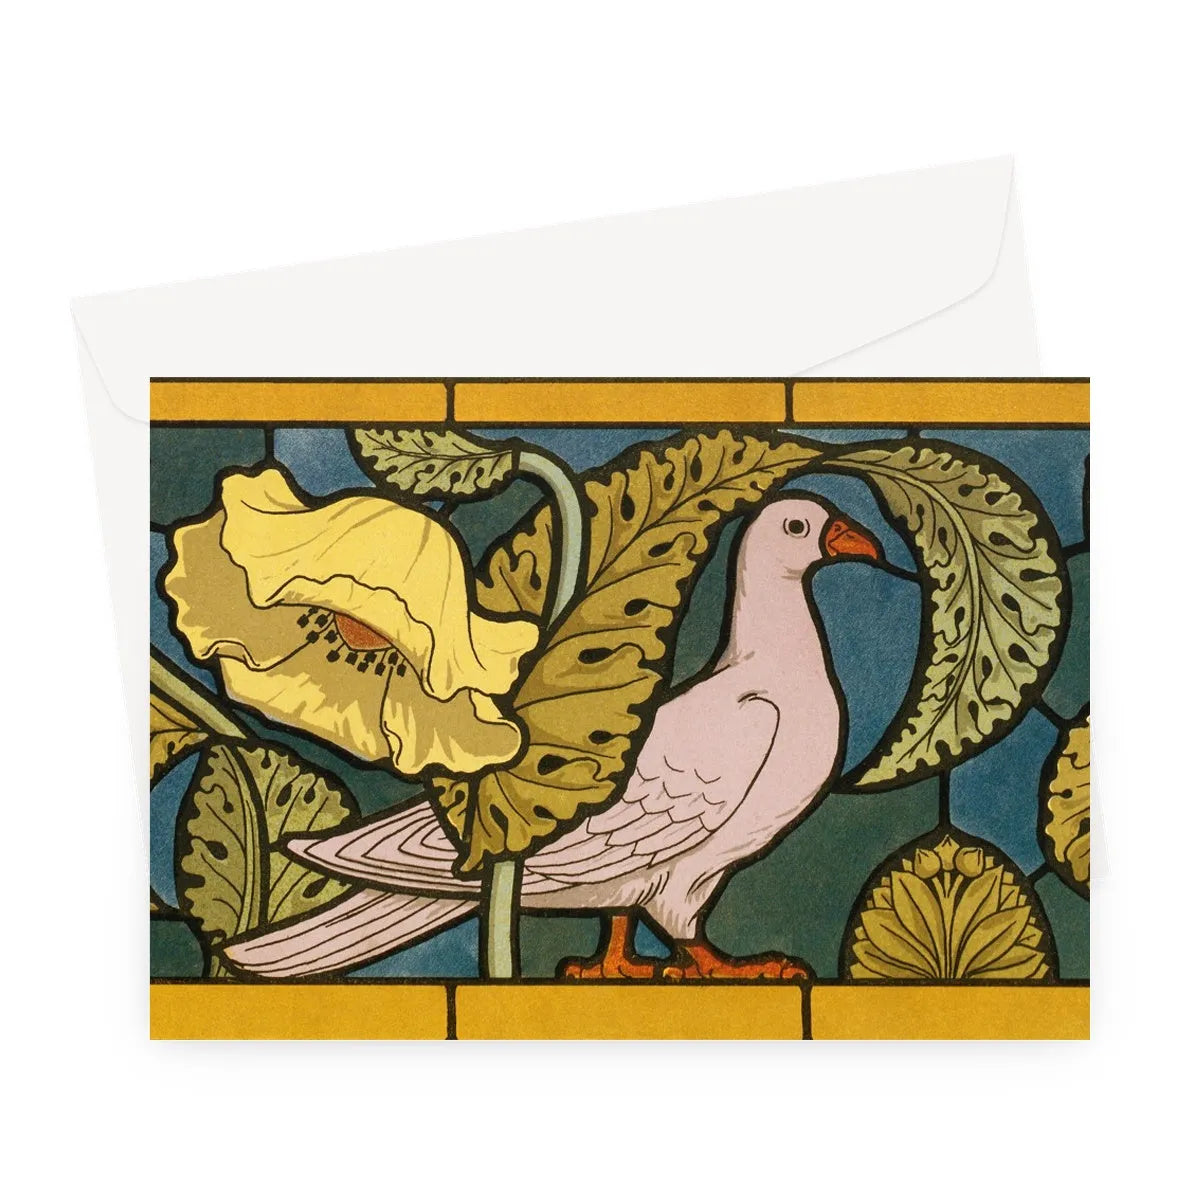 Pigeon Et Pavots By Maurice Pillard Verneuil Greeting Card - A5 Landscape / 1 x A5 Card - Greeting & Note Cards